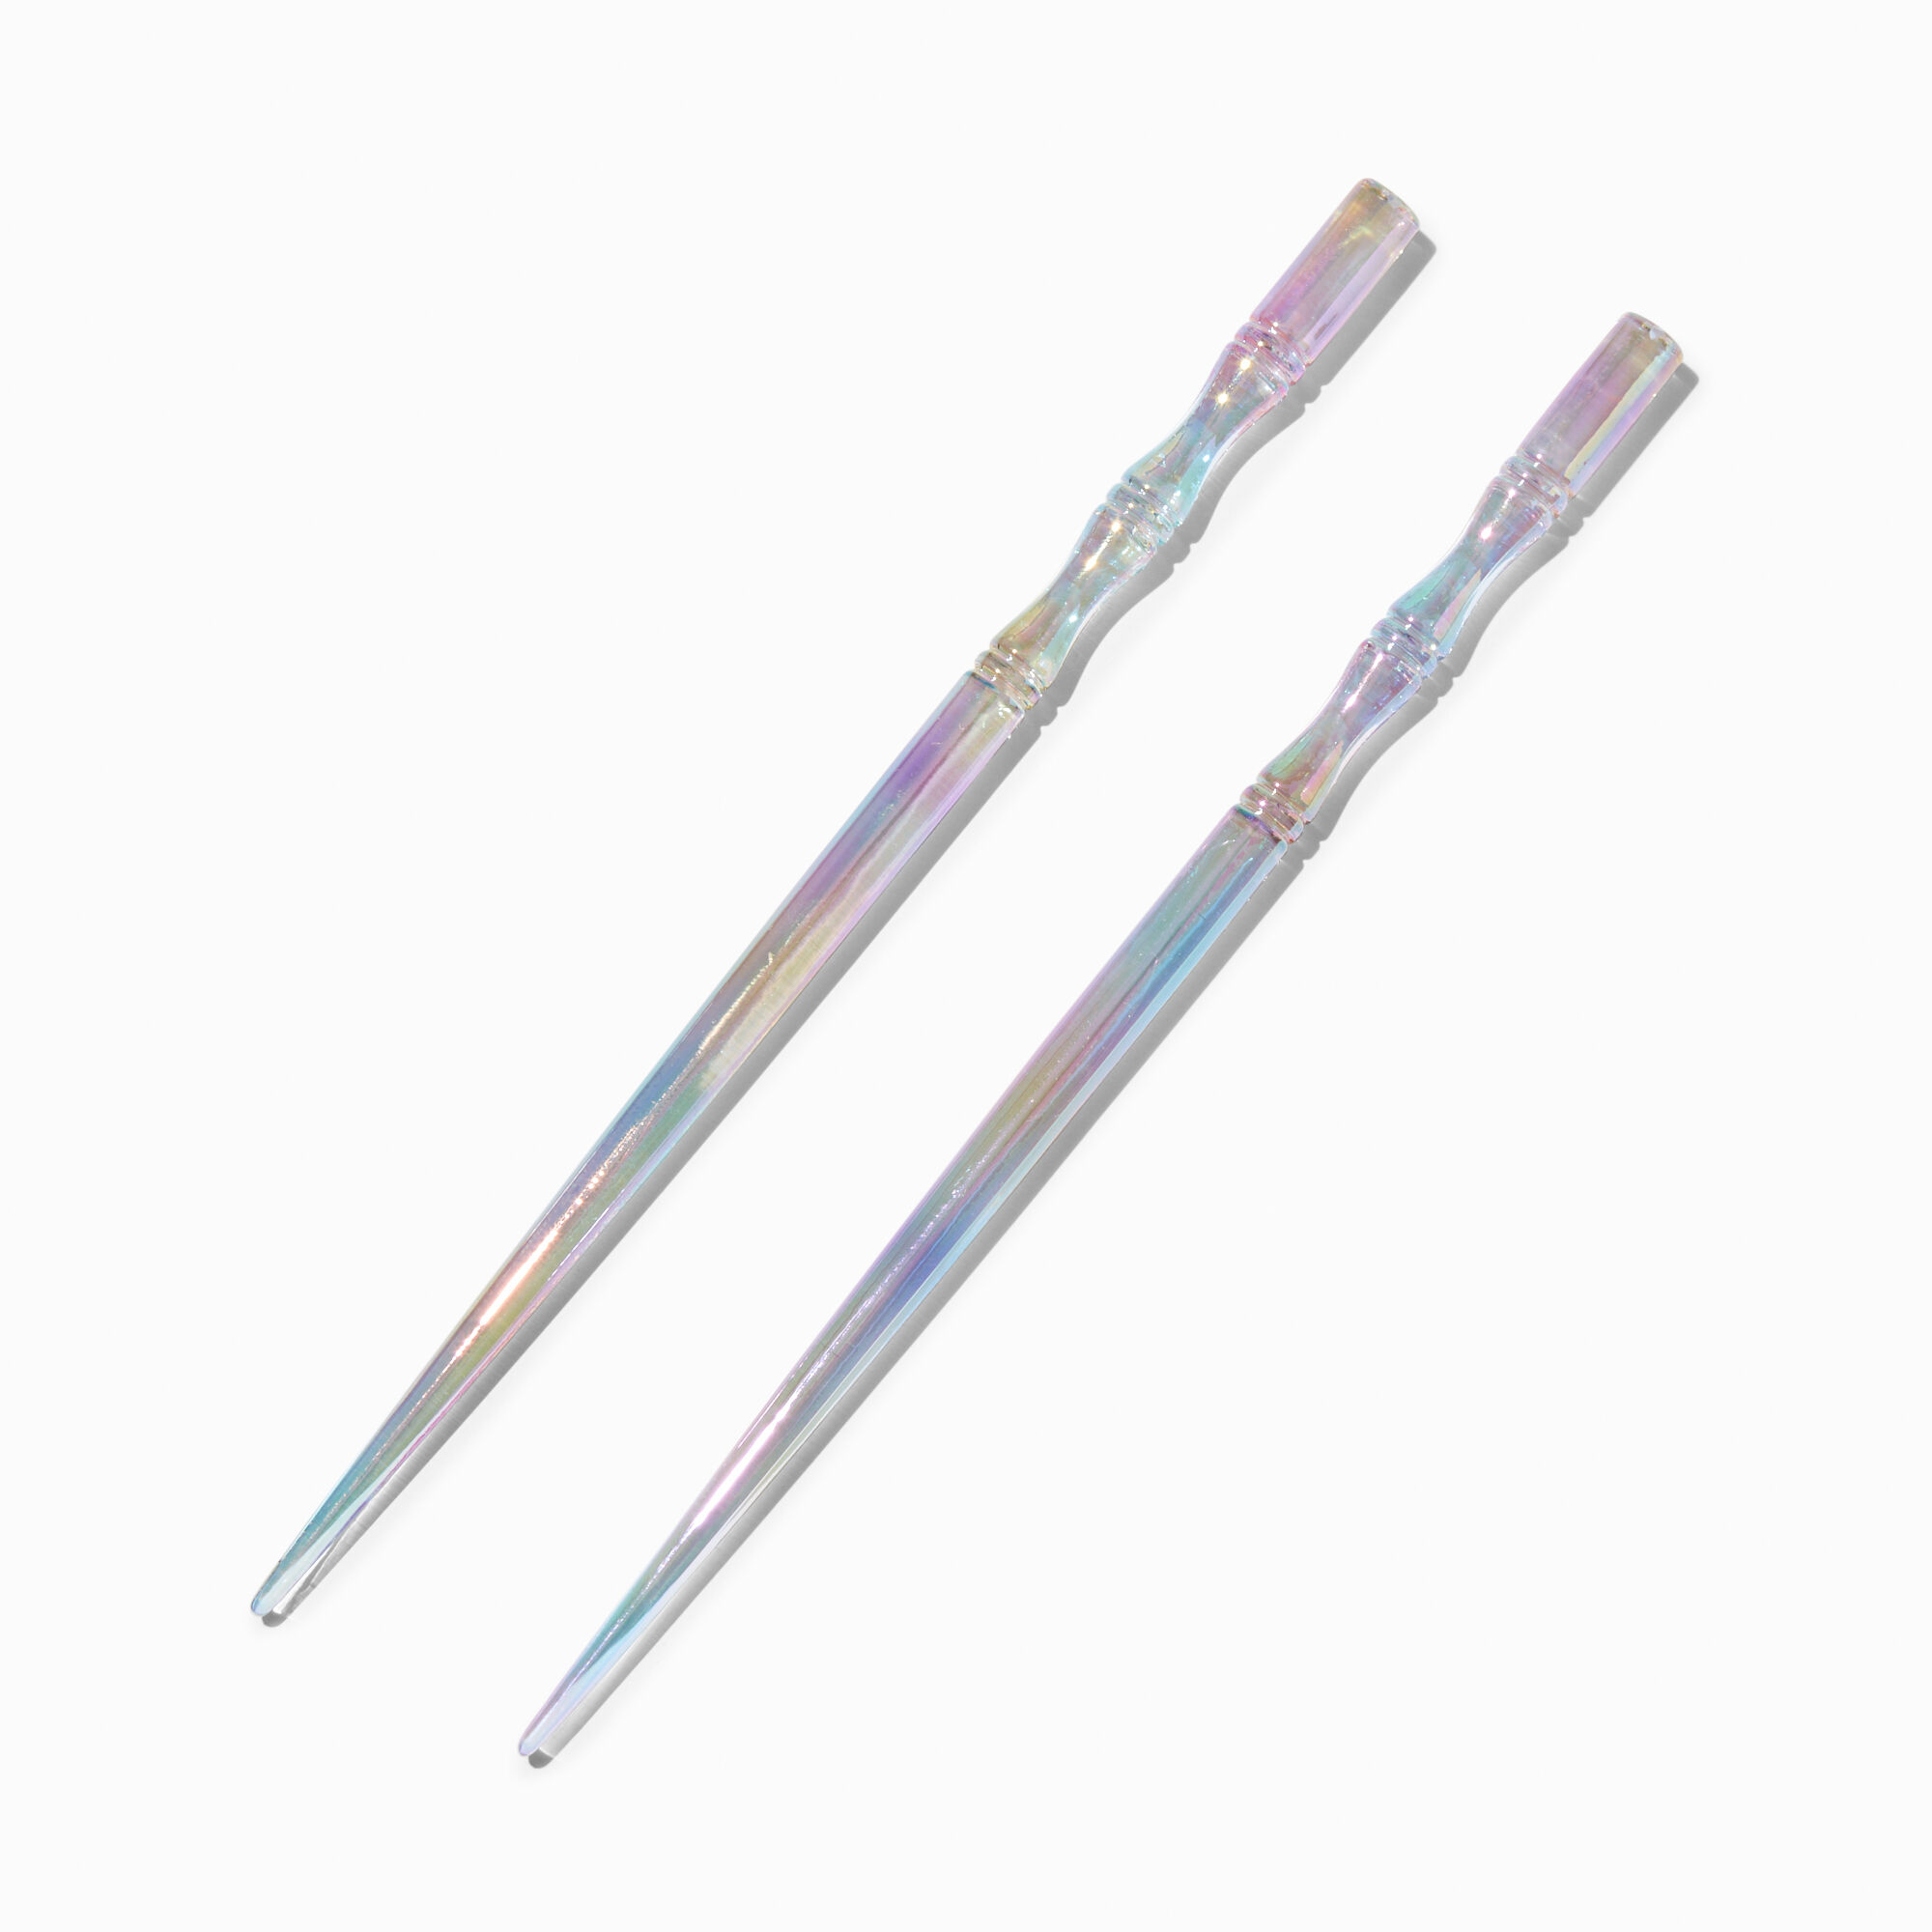 View Claires Iridescent Hair Sticks 2 Pack information